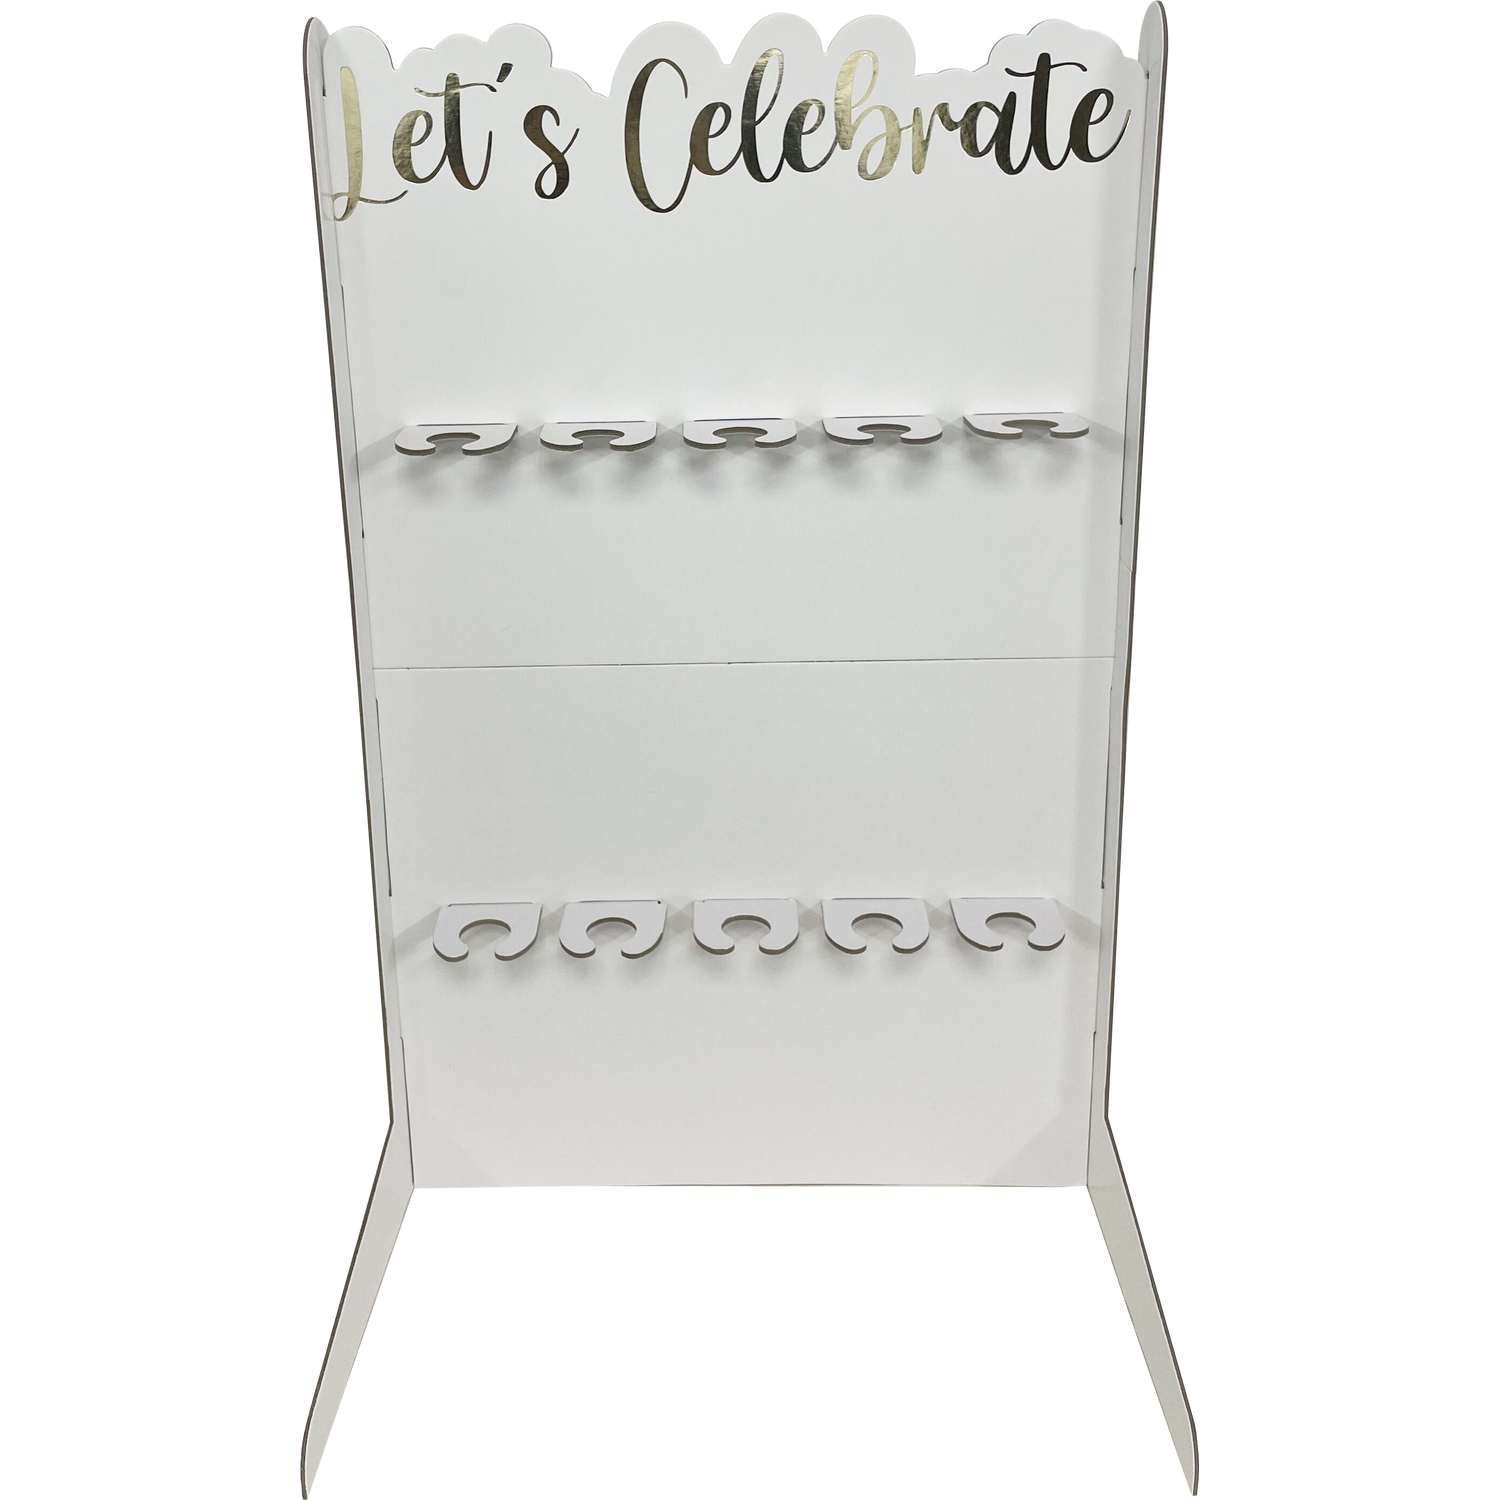 White Lets Celebrate Stand Party Decoration Image